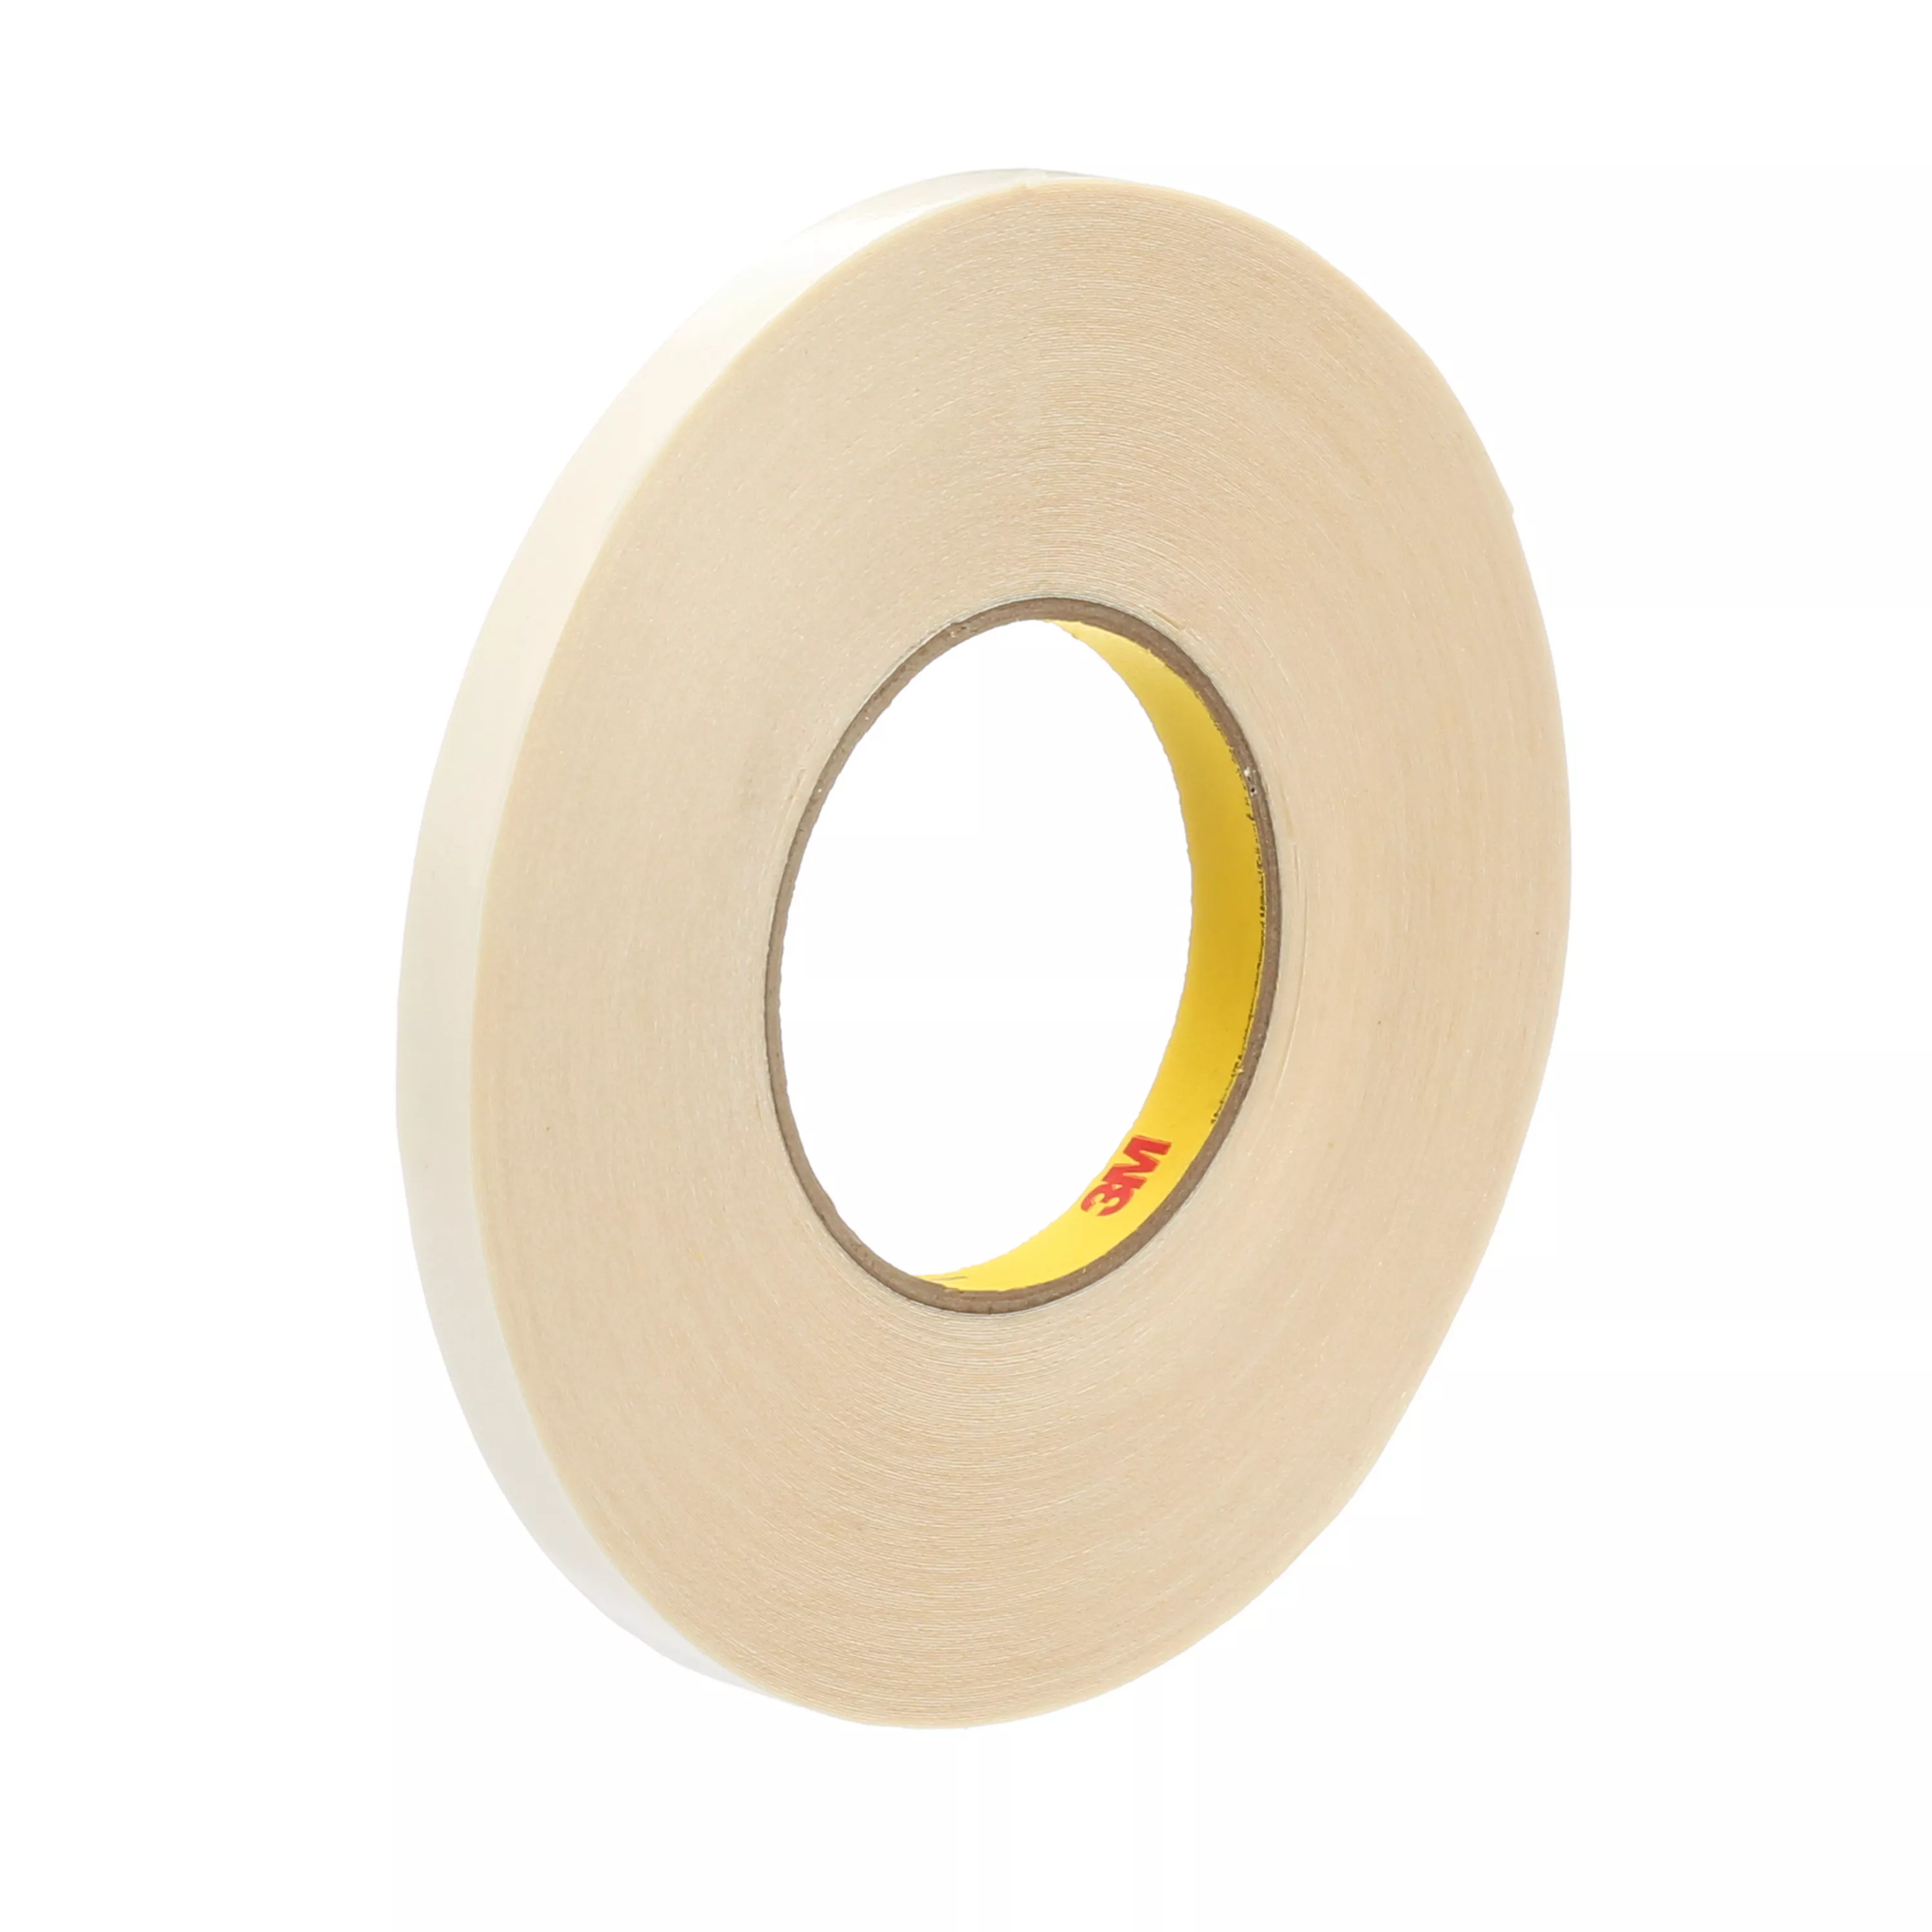 SKU 7010313539 | 3M™ Venture Tape™ Double Coated Tape 514CWR